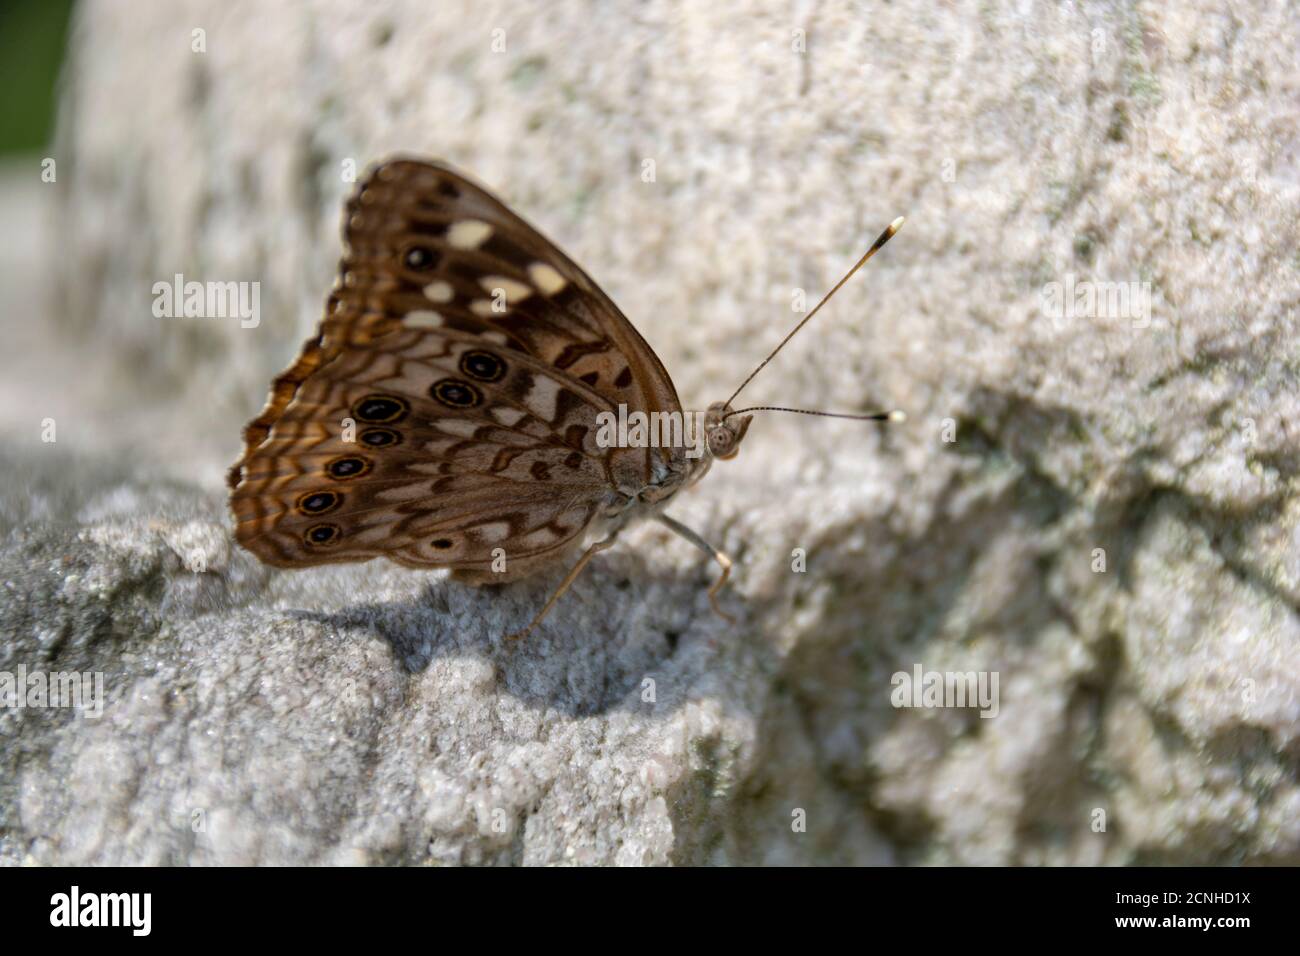 A brown and white spotted Hackberry Emperor butterfly warms itself on a stone in the warm sunshine. Stock Photo